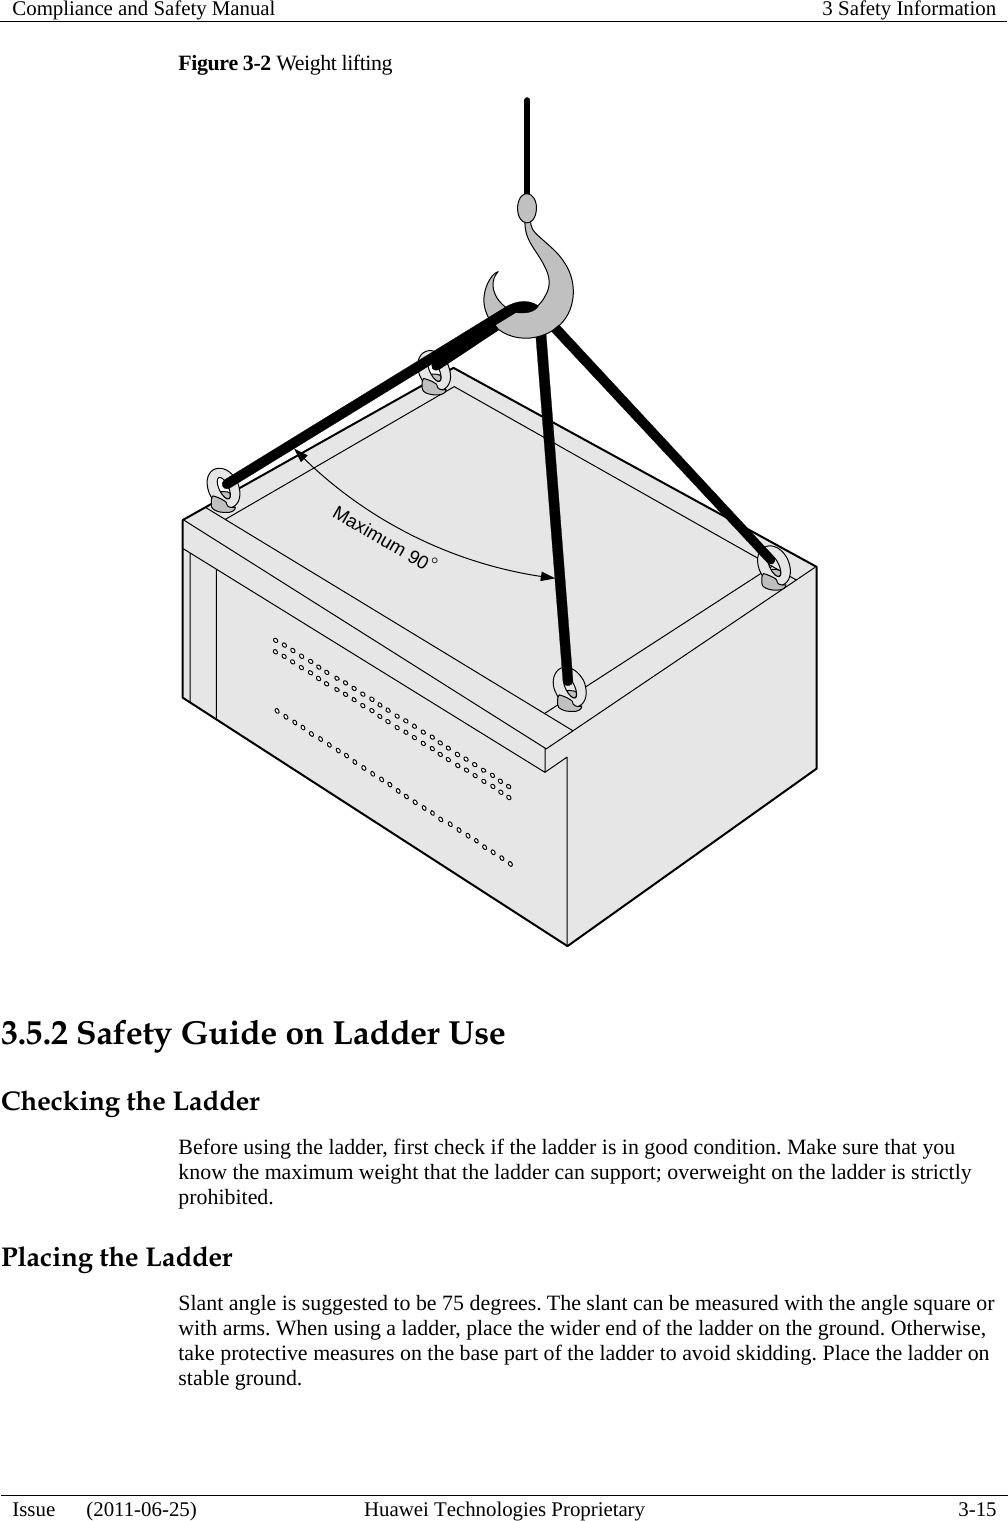 Compliance and Safety Manual  3 Safety Information  Issue   (2011-06-25)  Huawei Technologies Proprietary  3-15 Figure 3-2 Weight lifting Maximum 90°  3.5.2 Safety Guide on Ladder Use Checking the Ladder Before using the ladder, first check if the ladder is in good condition. Make sure that you know the maximum weight that the ladder can support; overweight on the ladder is strictly prohibited. Placing the Ladder Slant angle is suggested to be 75 degrees. The slant can be measured with the angle square or with arms. When using a ladder, place the wider end of the ladder on the ground. Otherwise, take protective measures on the base part of the ladder to avoid skidding. Place the ladder on stable ground. 